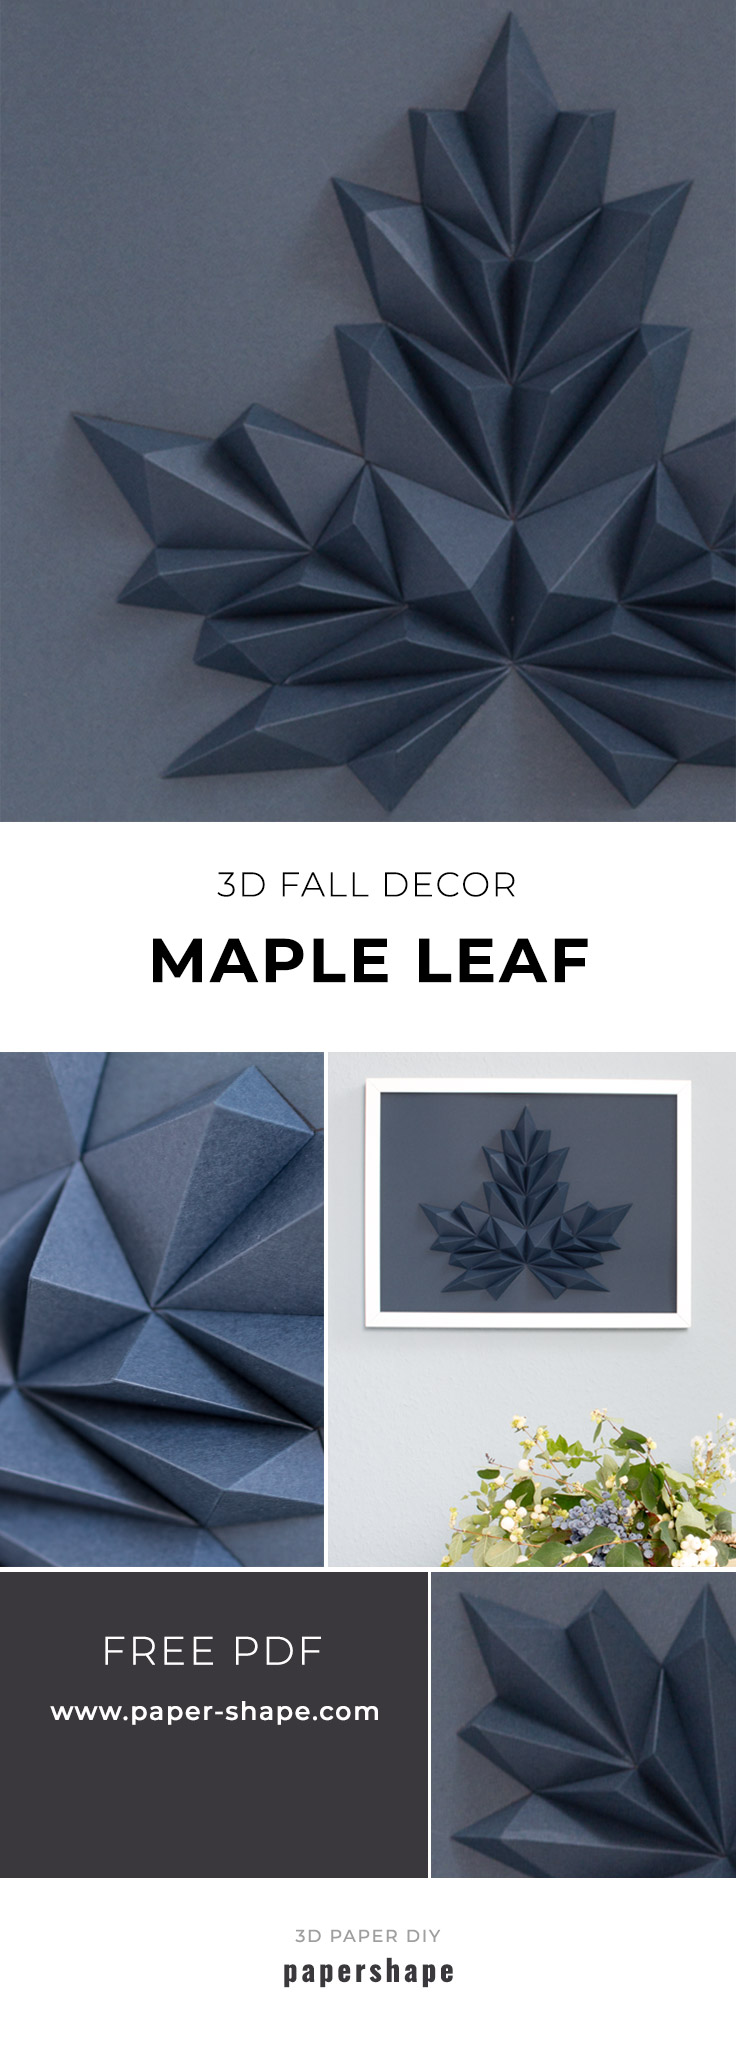 fall craft: 3d maple leaf as cool wall decor - free template #papershape   